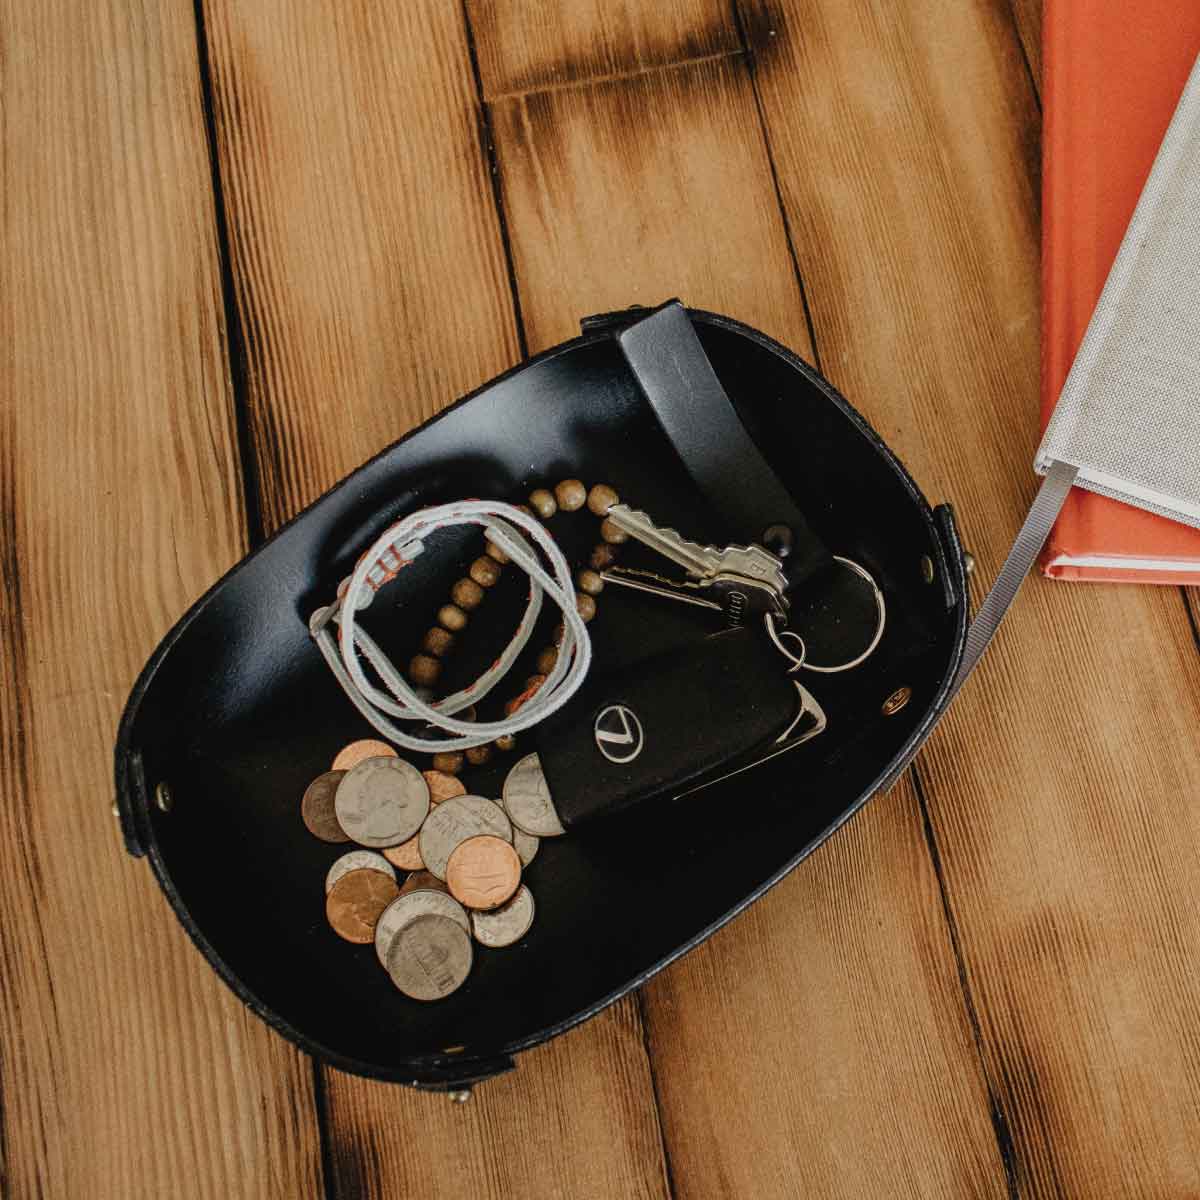 Deluxe Leather Valet Tray – Odin Leather Goods